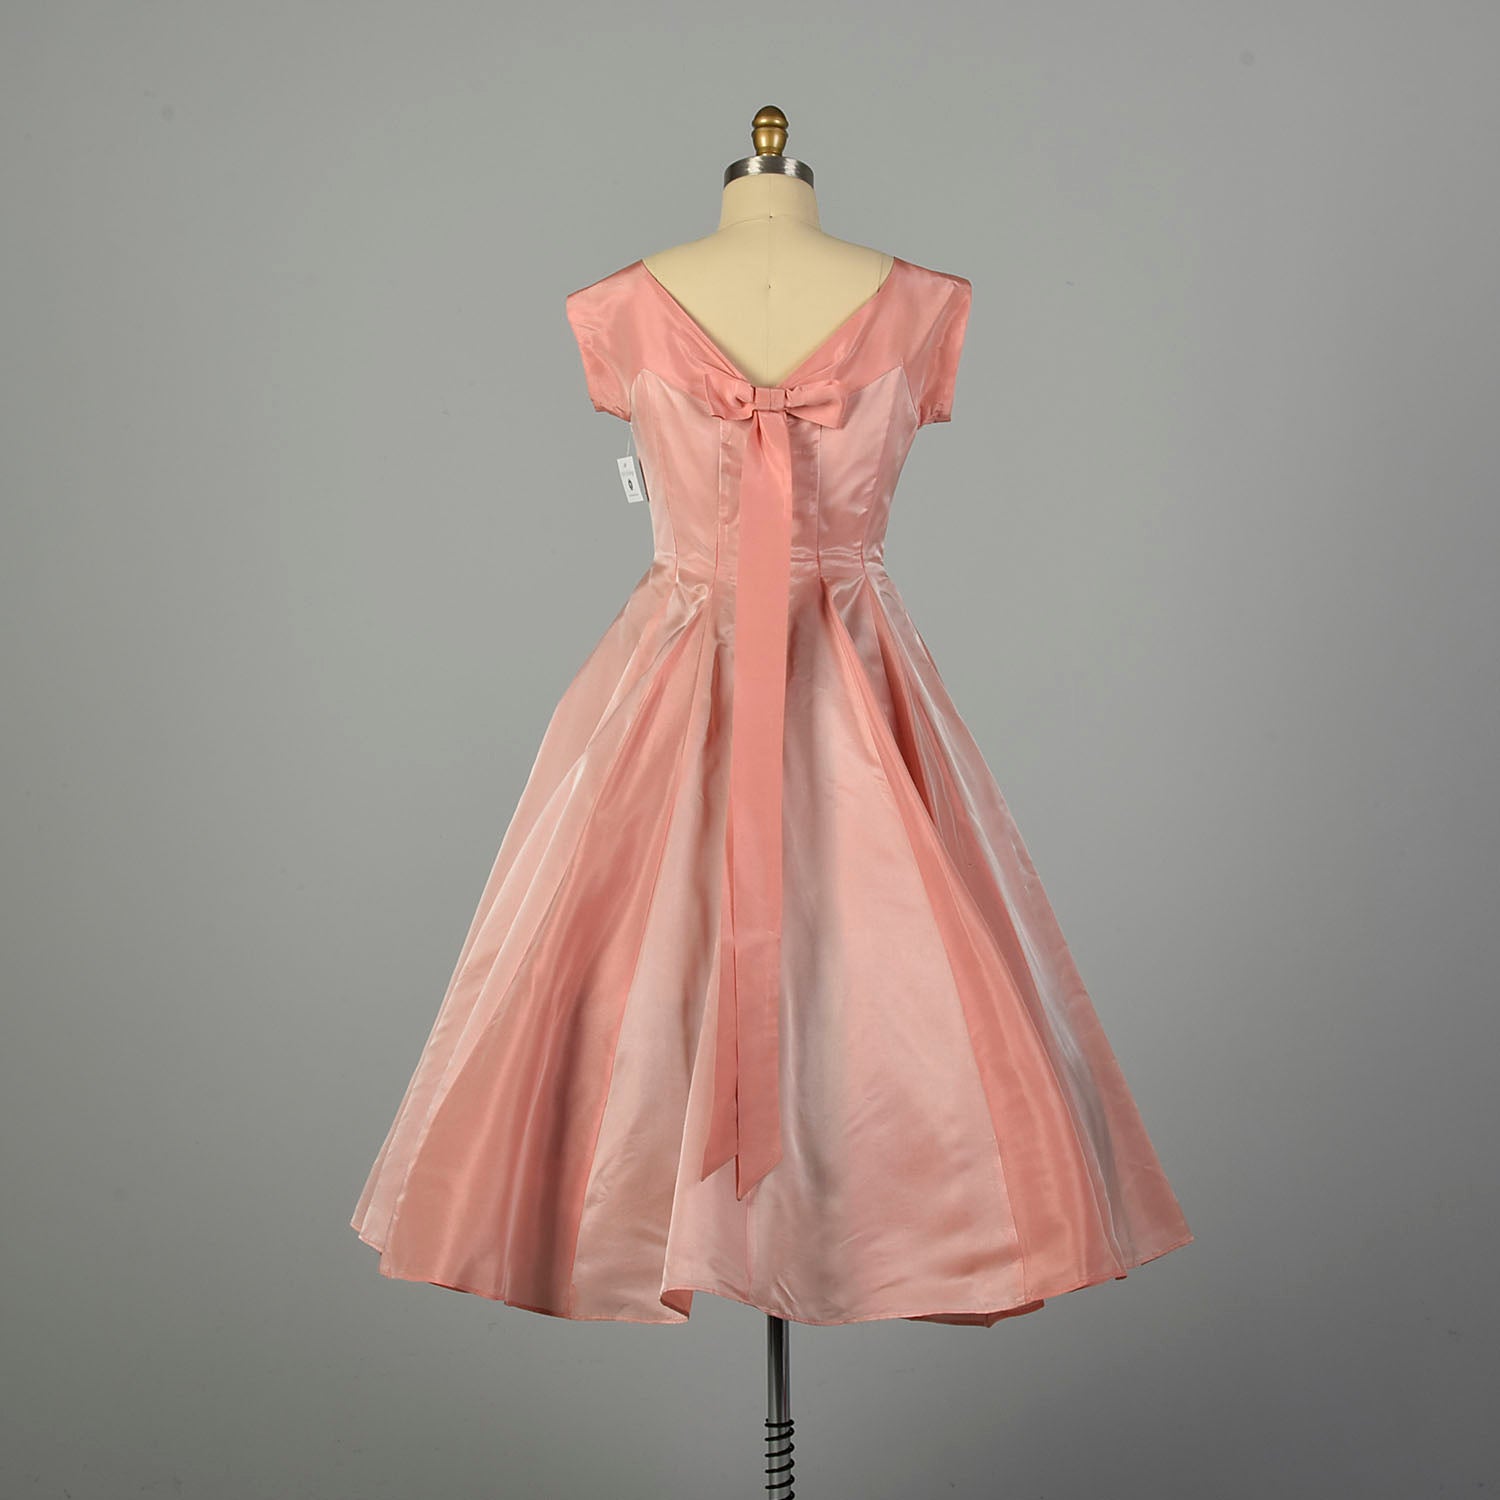 Medium 1950s Dress Pink Fit and Flare Circle Skirt Prom Evening Cocktail Gown